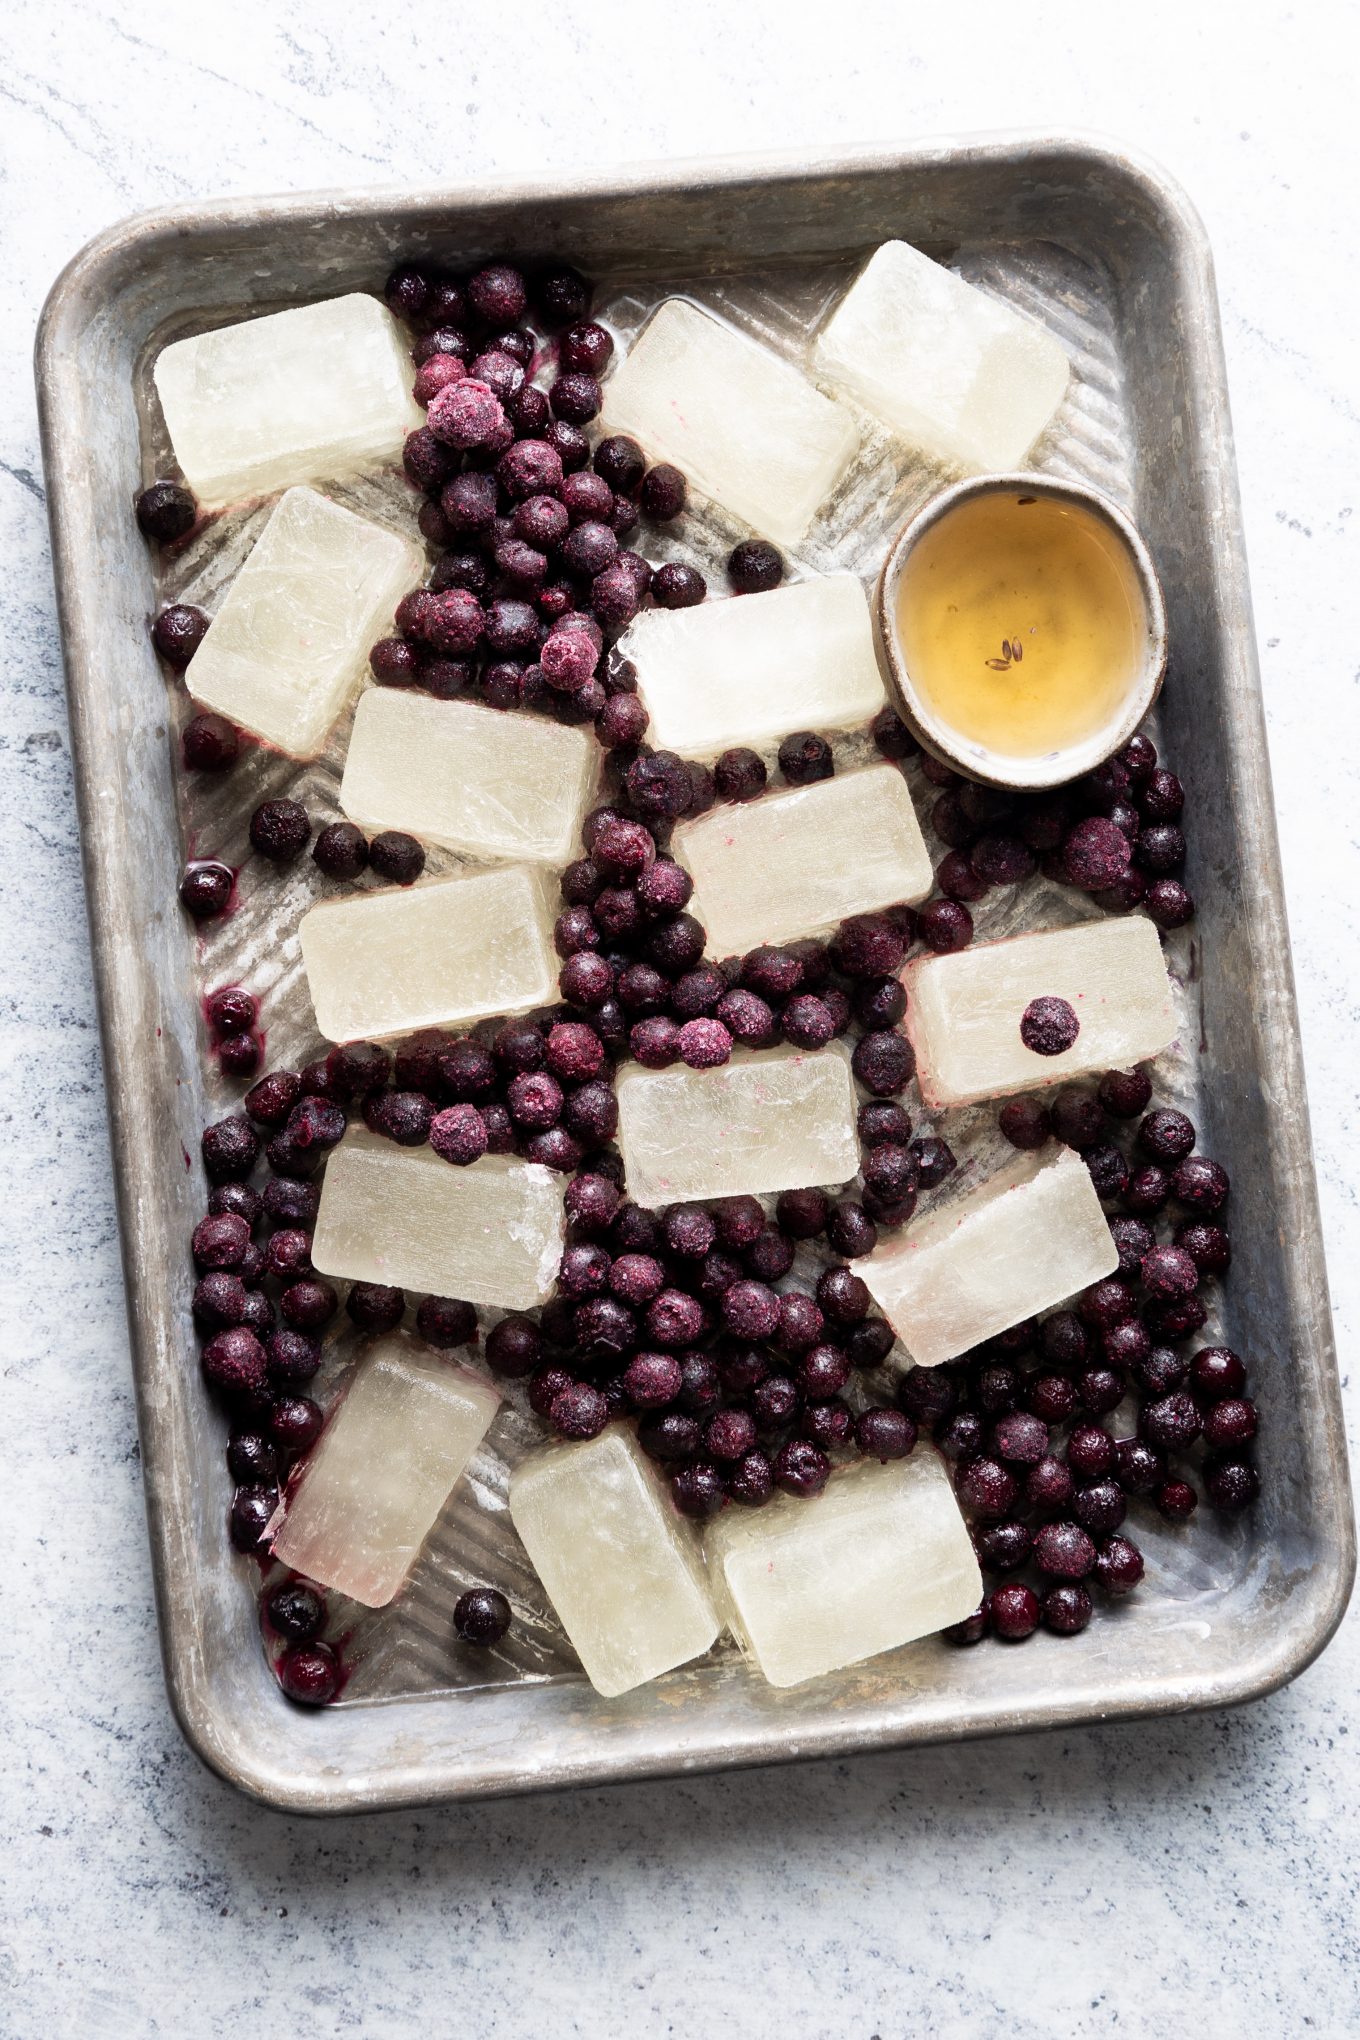  Baking sheet with ice cubes and frozen blueberries.